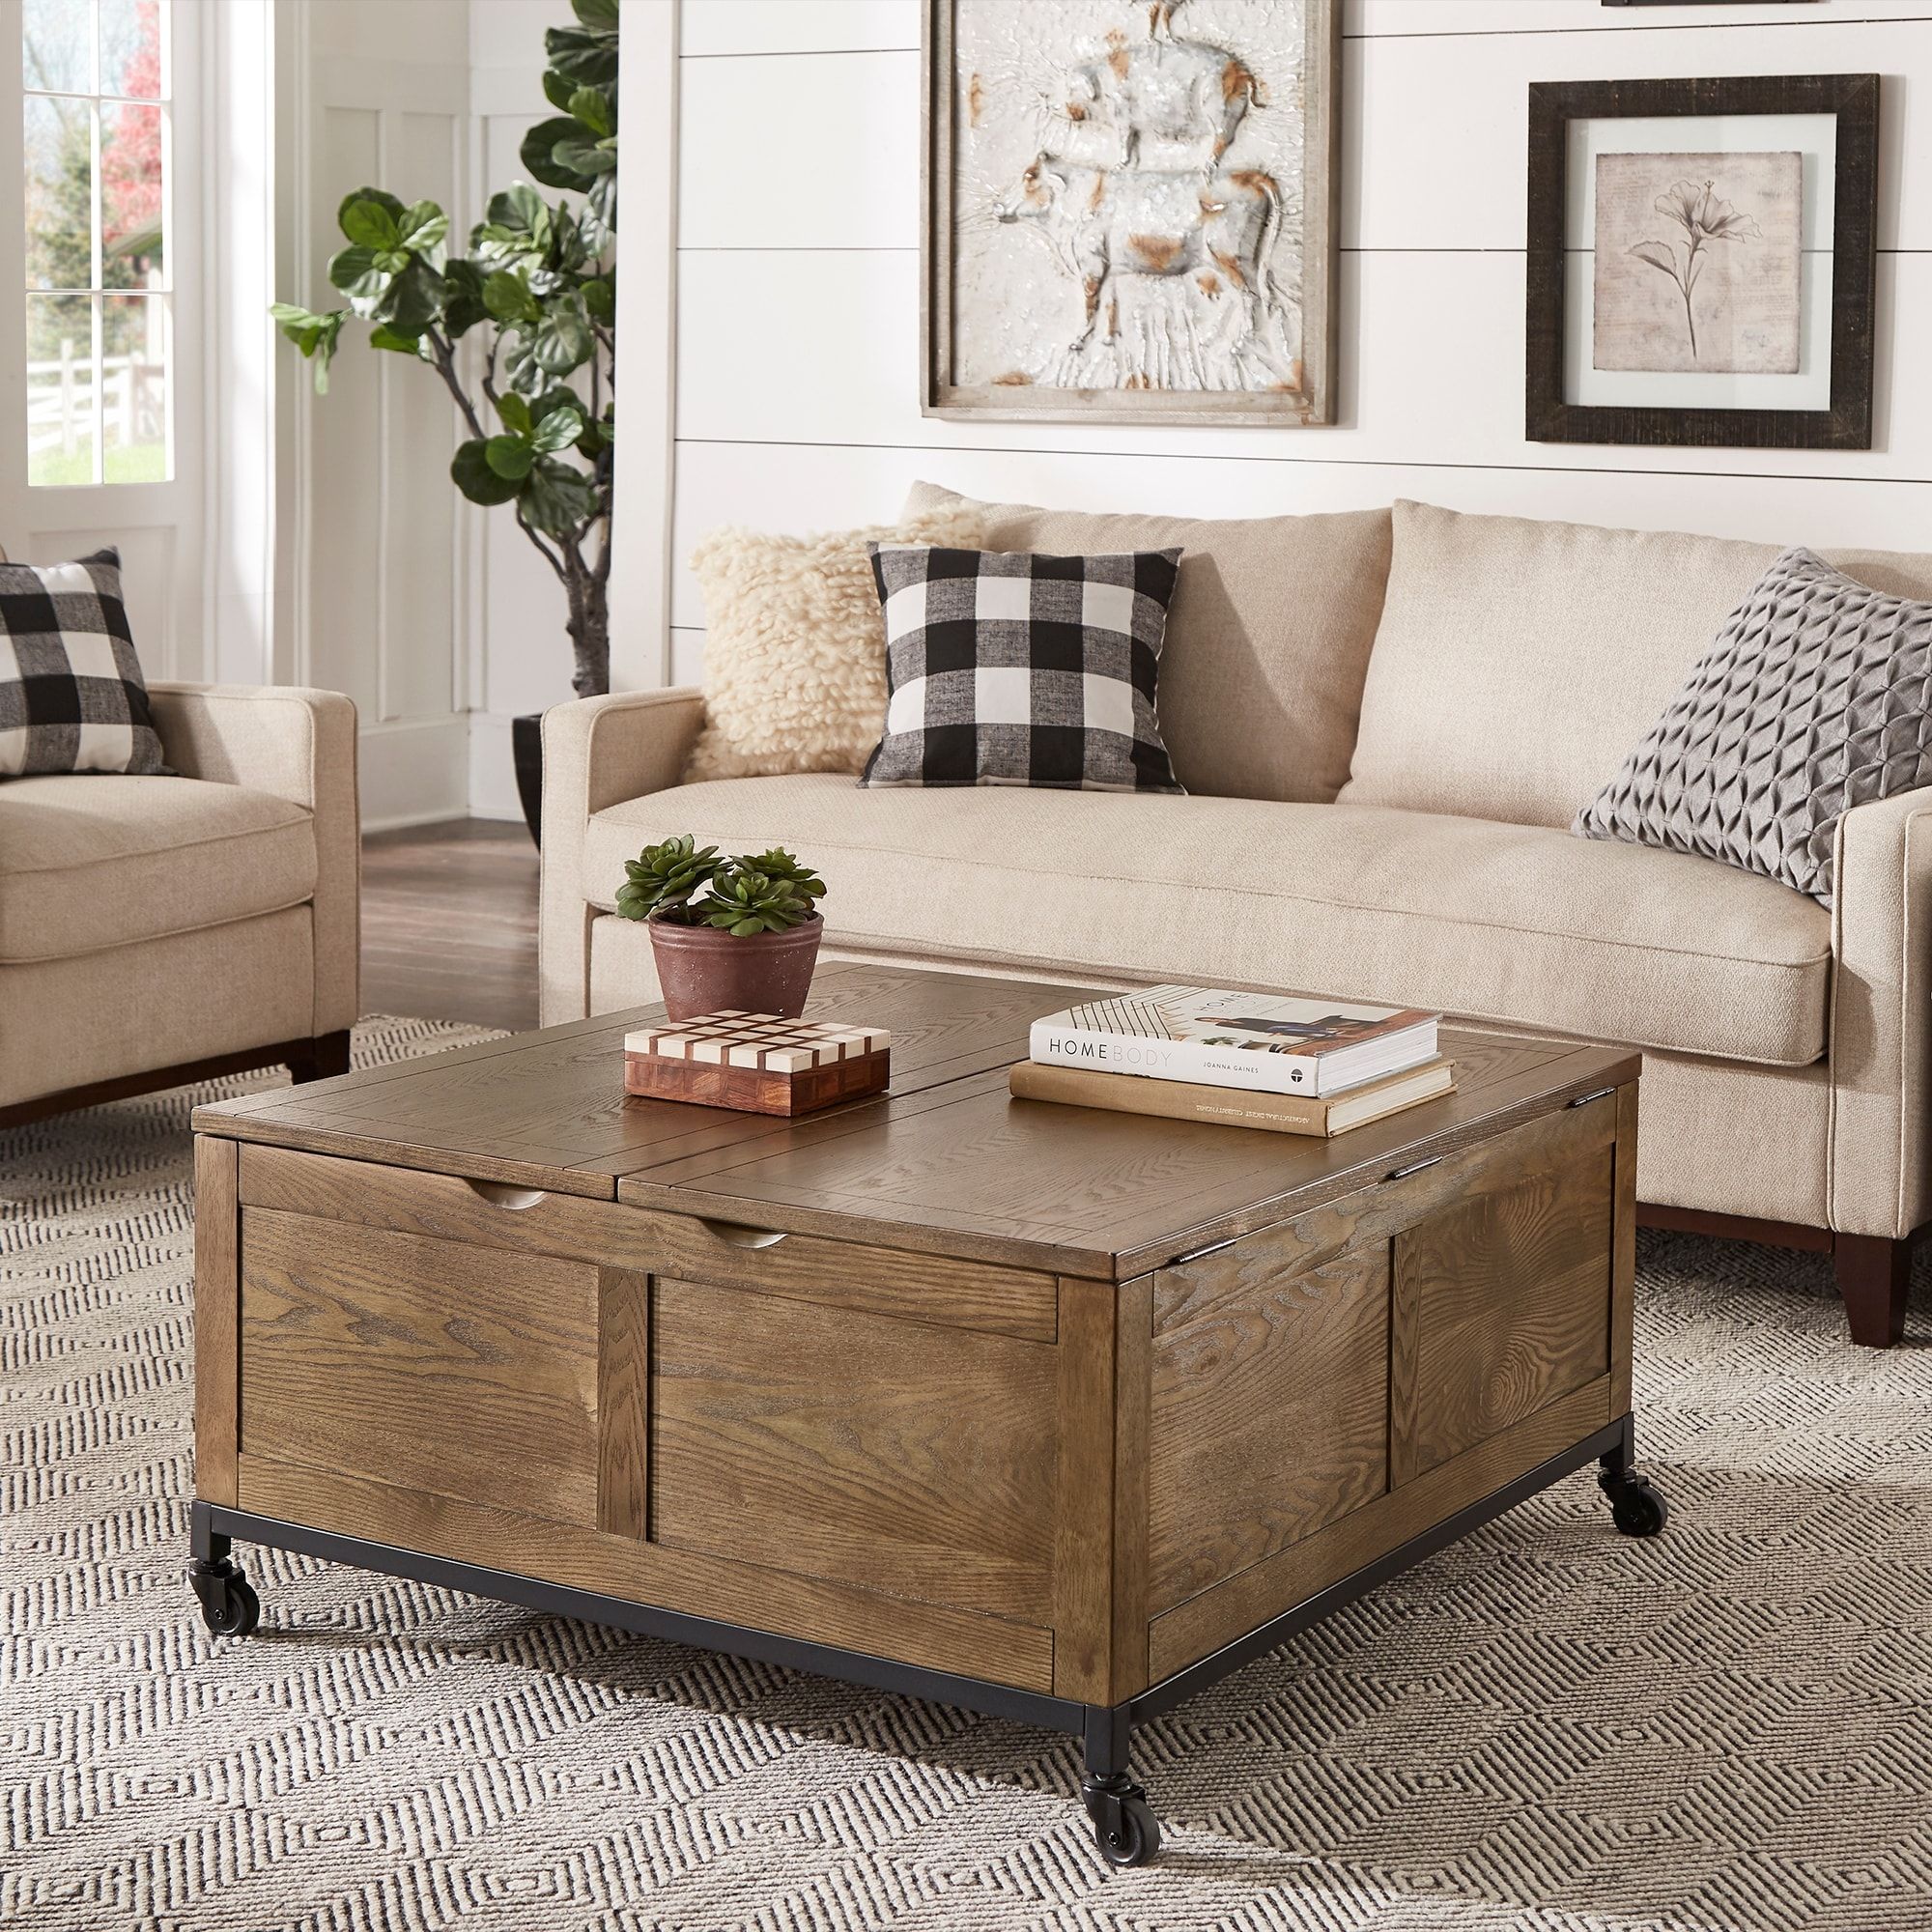 Shay Square Storage Trunk Coffee Table With Caster Wheelsinspire Q  Artisan – On Sale – Bed Bath & Beyond – 22408031 With Regard To Coffee Tables With Casters (View 3 of 15)